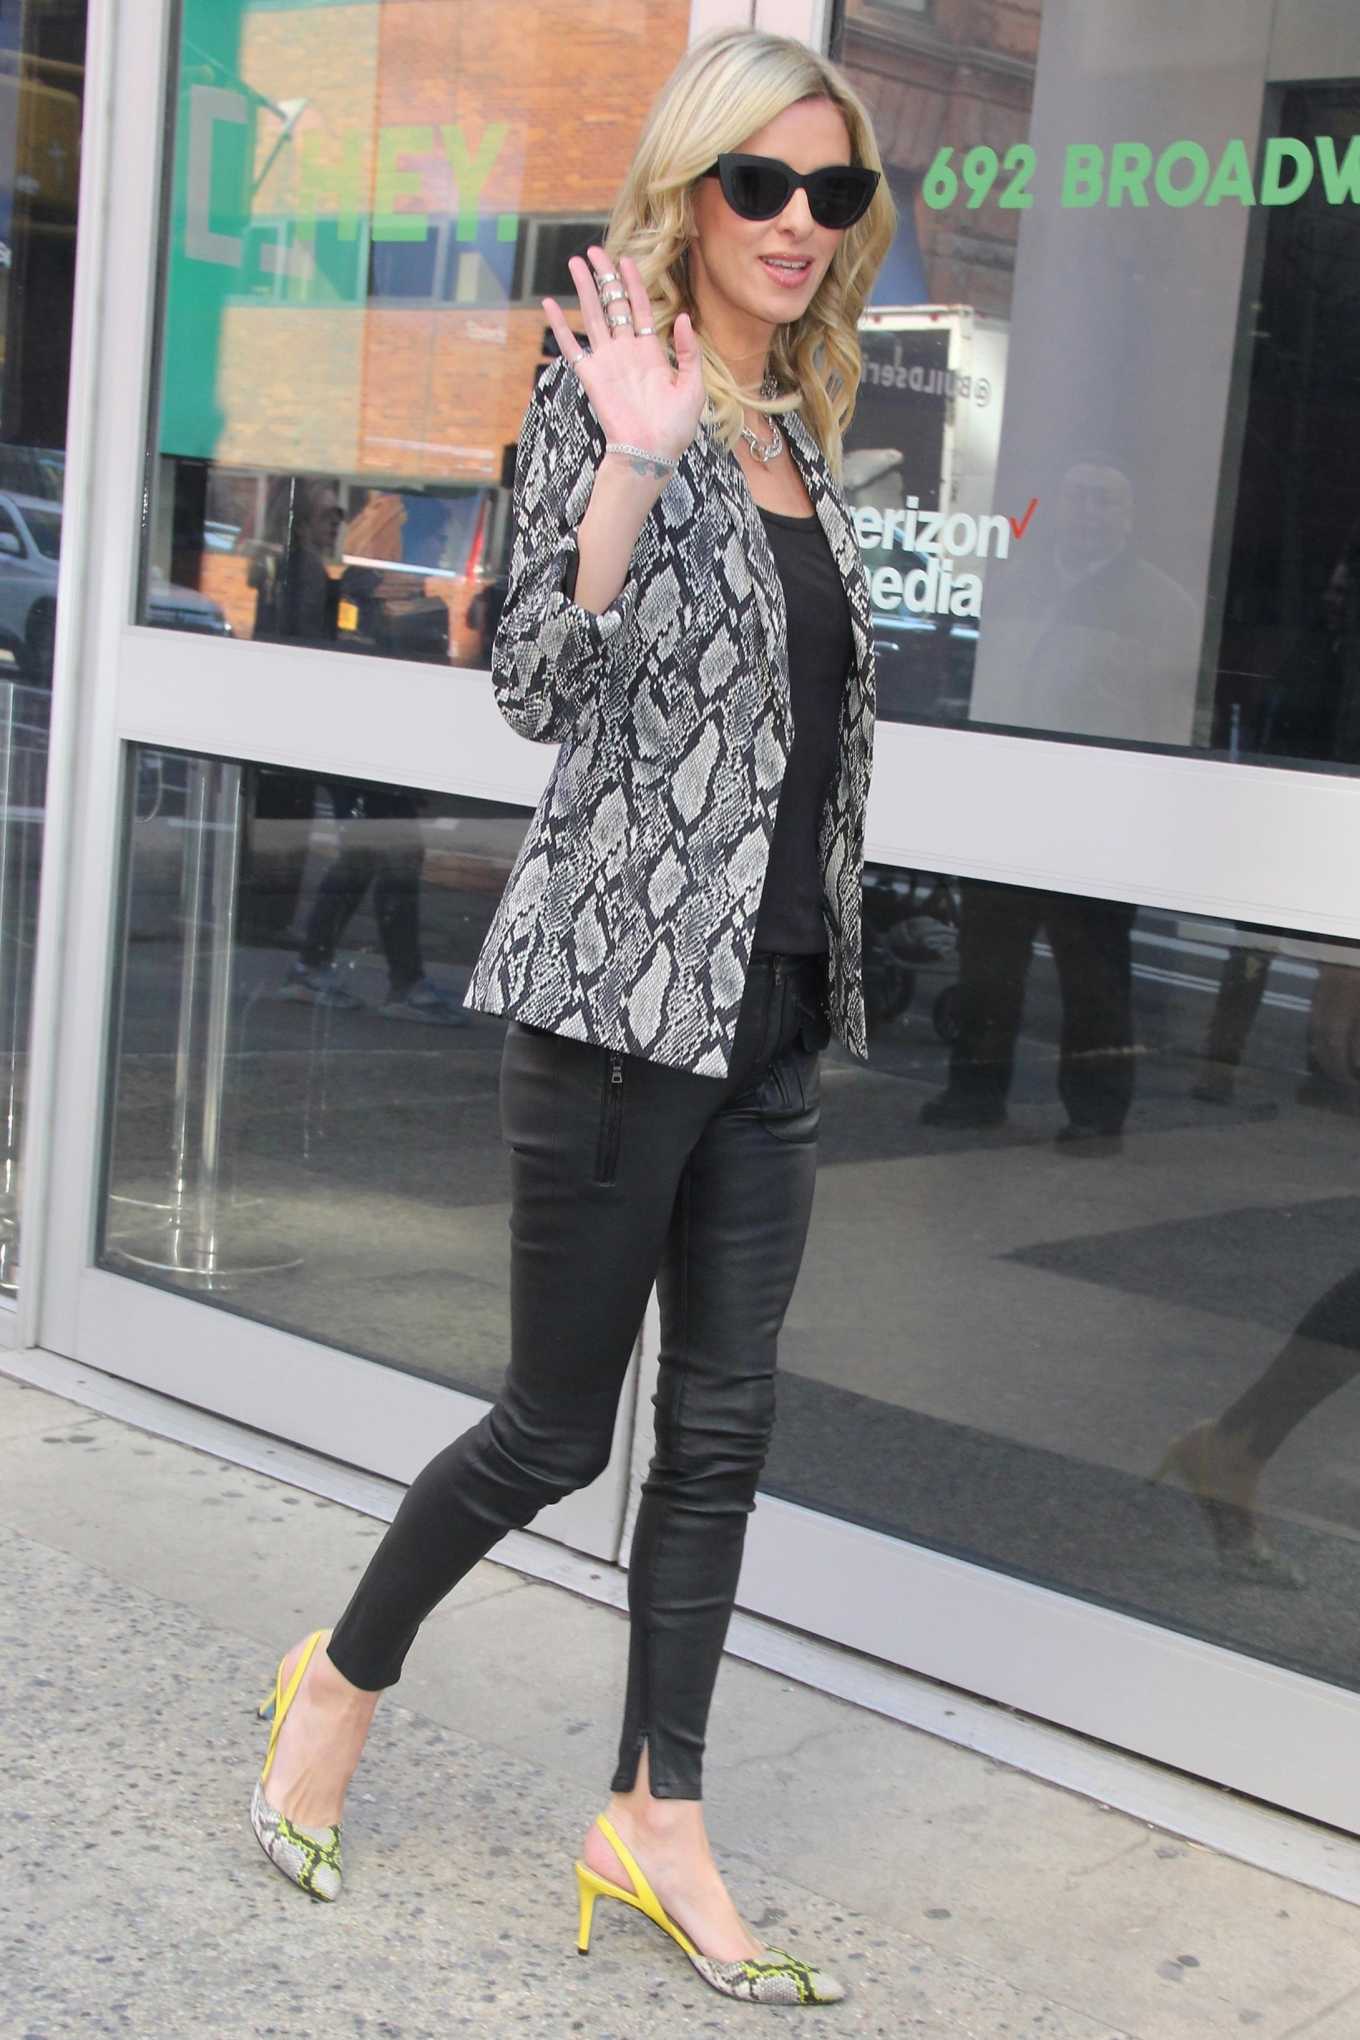 Nicky Hilton â€“ Seen At AOL Building In New York